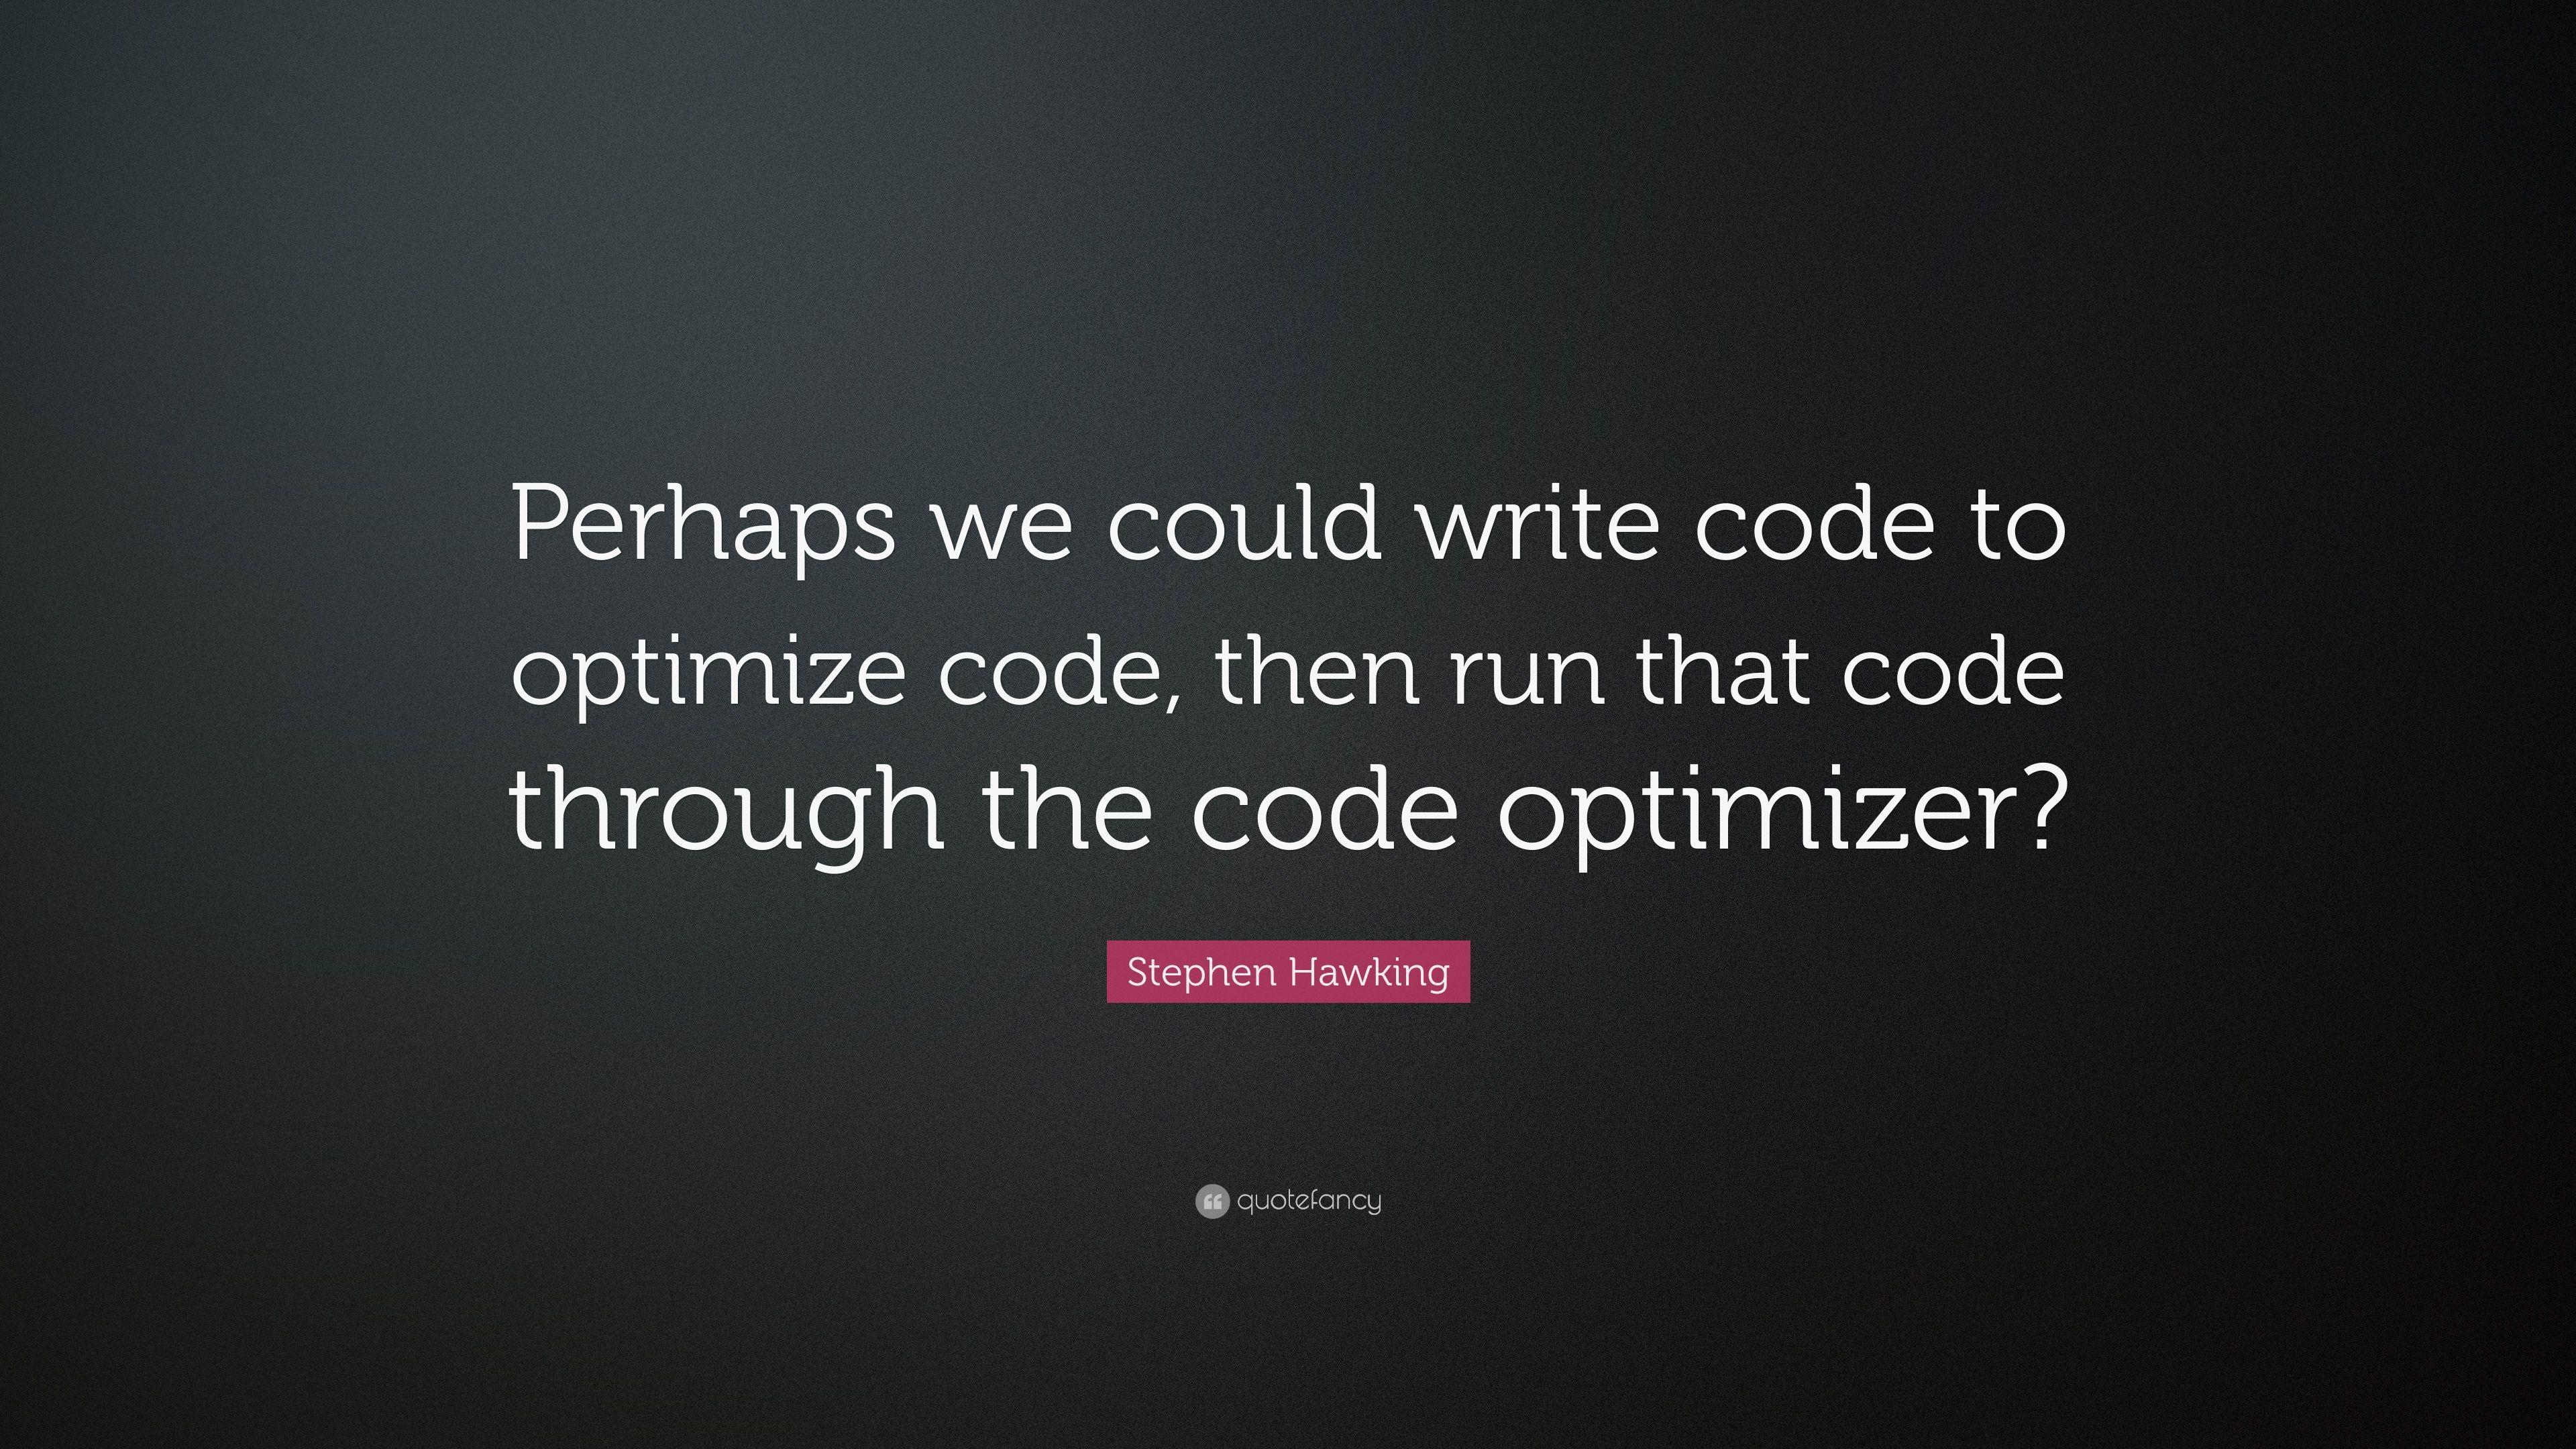 Stephen Hawking Quote: “Perhaps we could write code to optimize